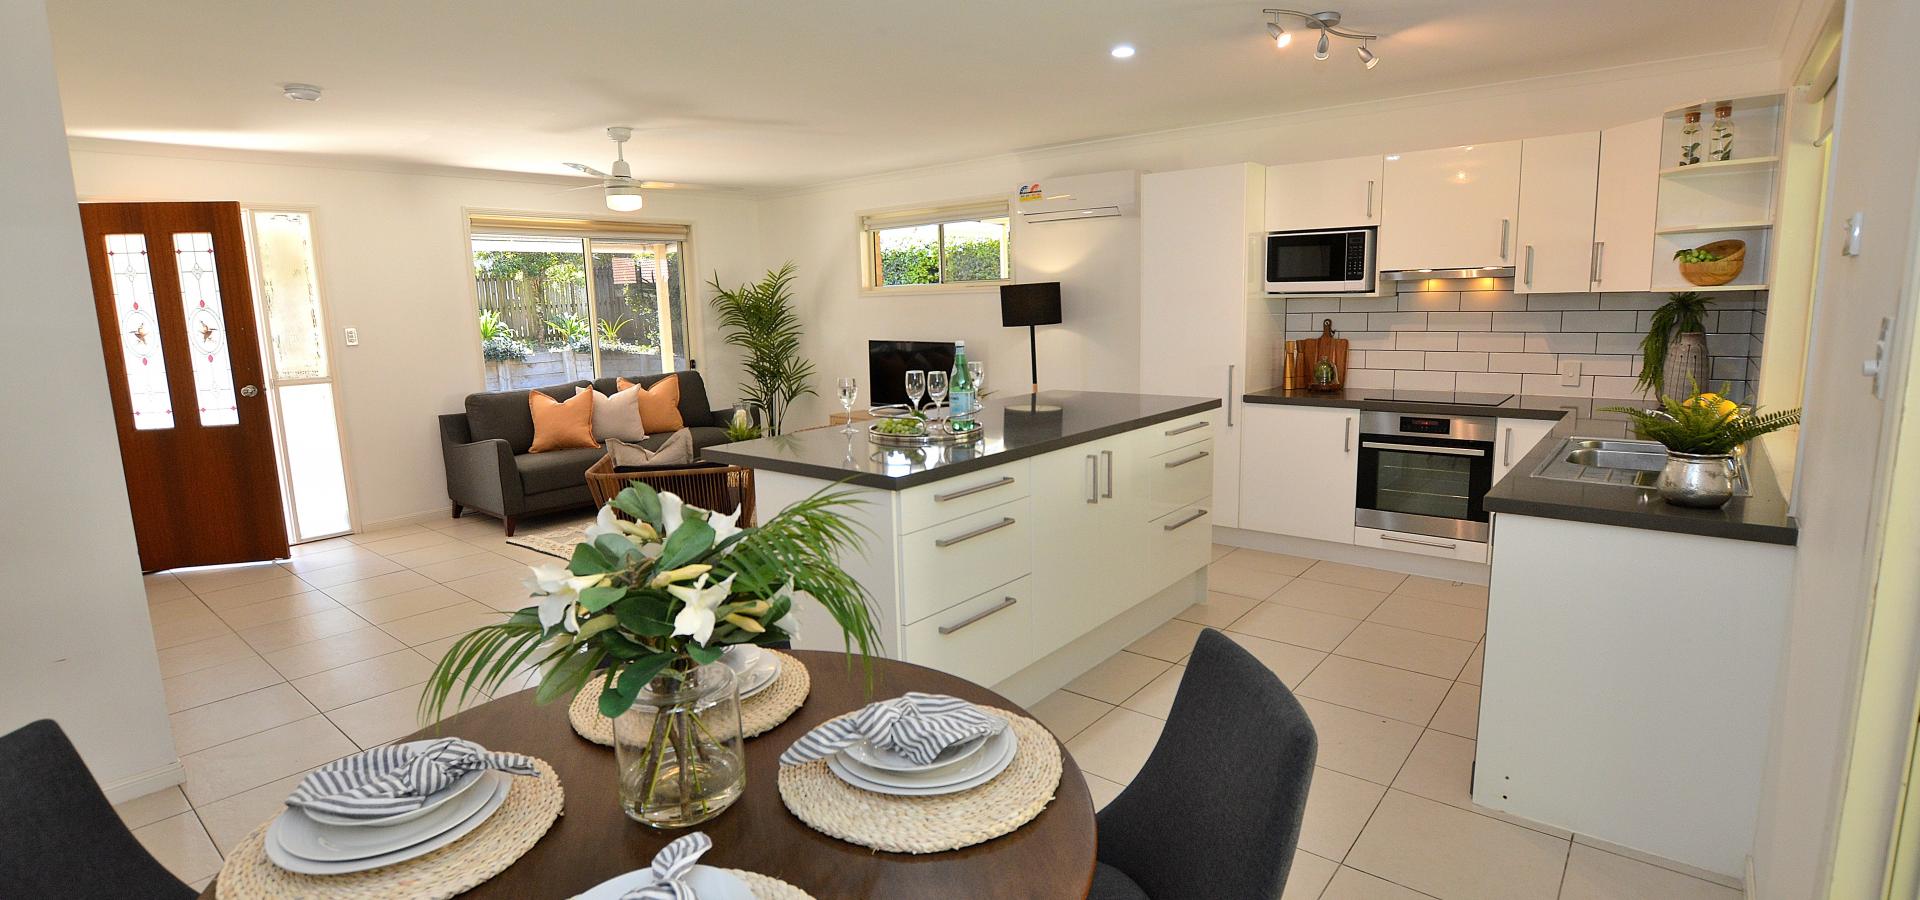 PERFECT LIVING IN THE HEART OF PALMWOODS ..